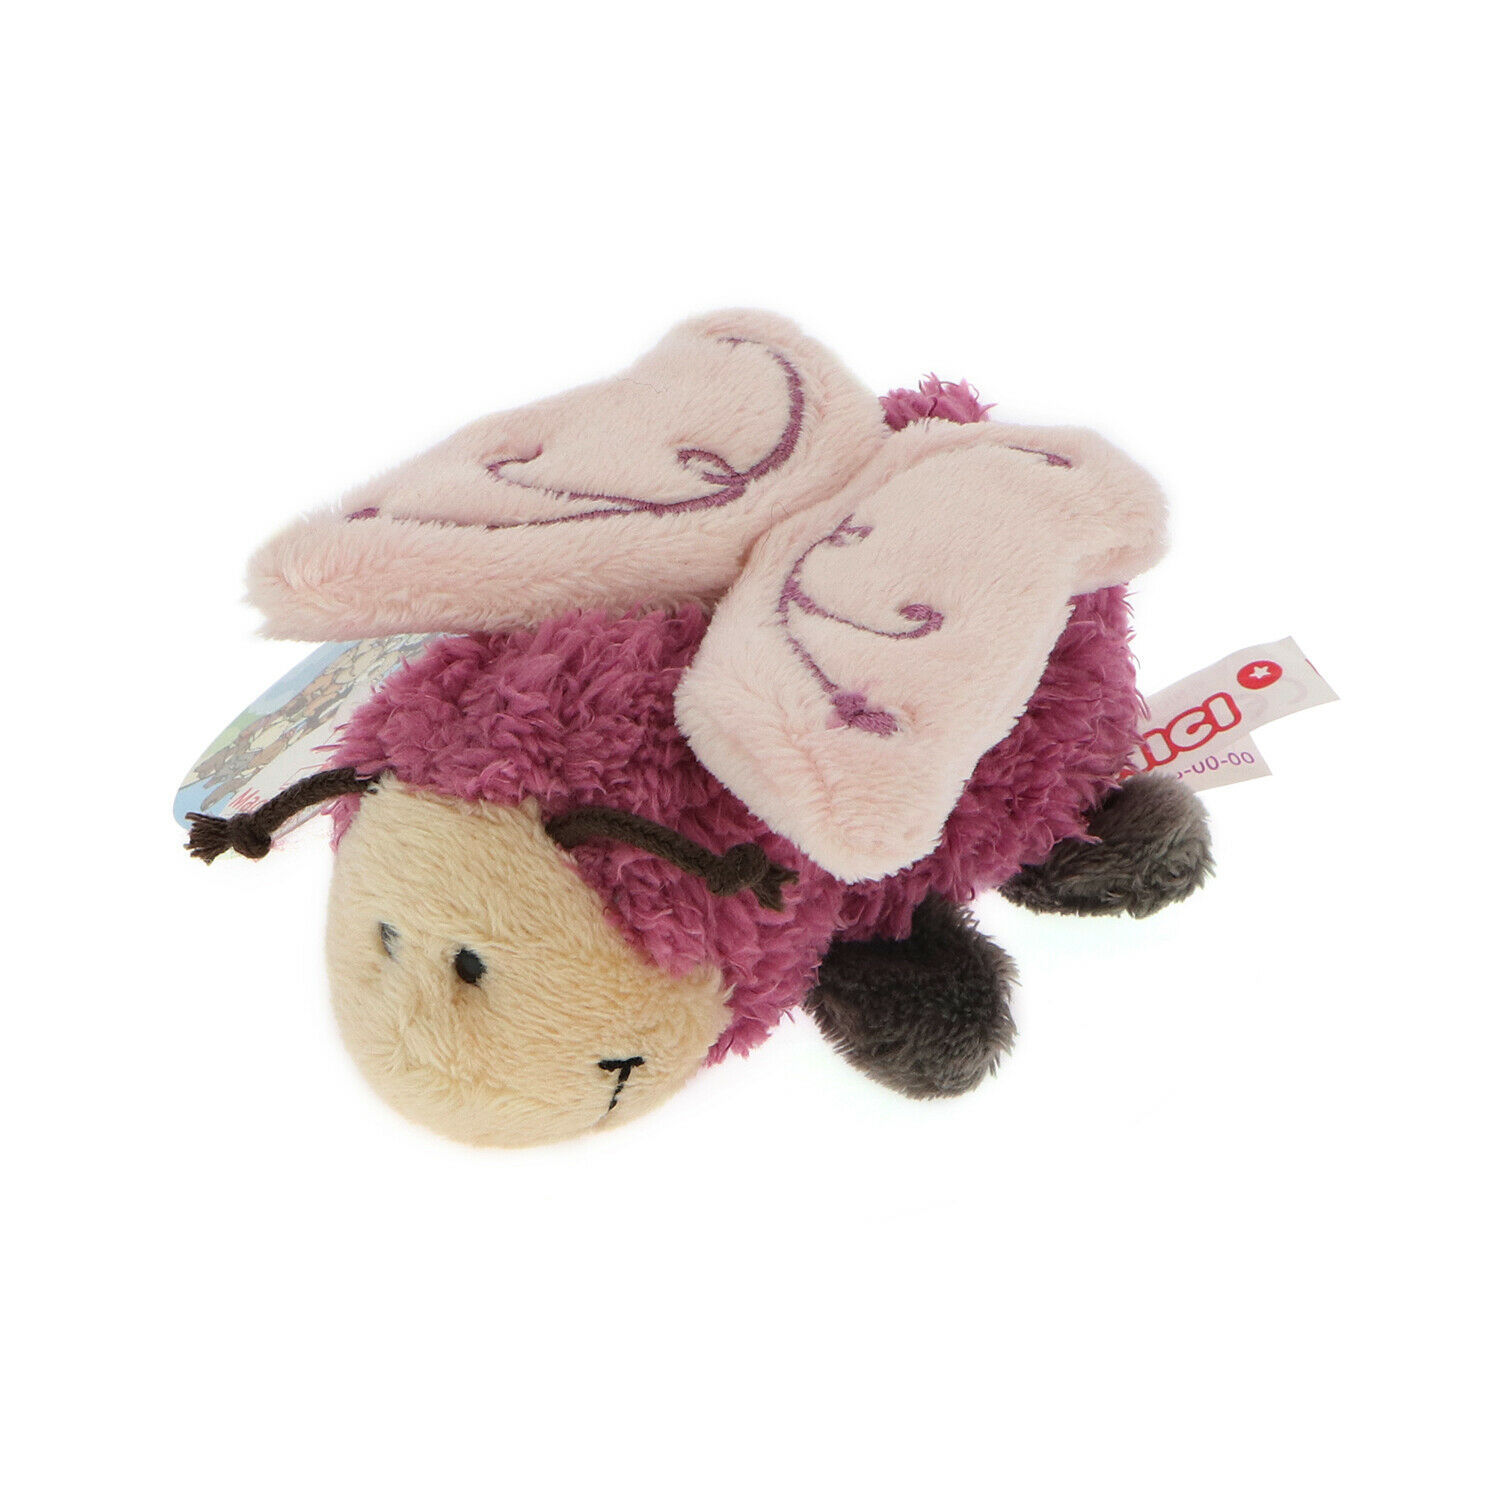 Primary image for MagNICI Butterfly Pink Stuffed Toy Magnet in Paws 5 inches 12 cm